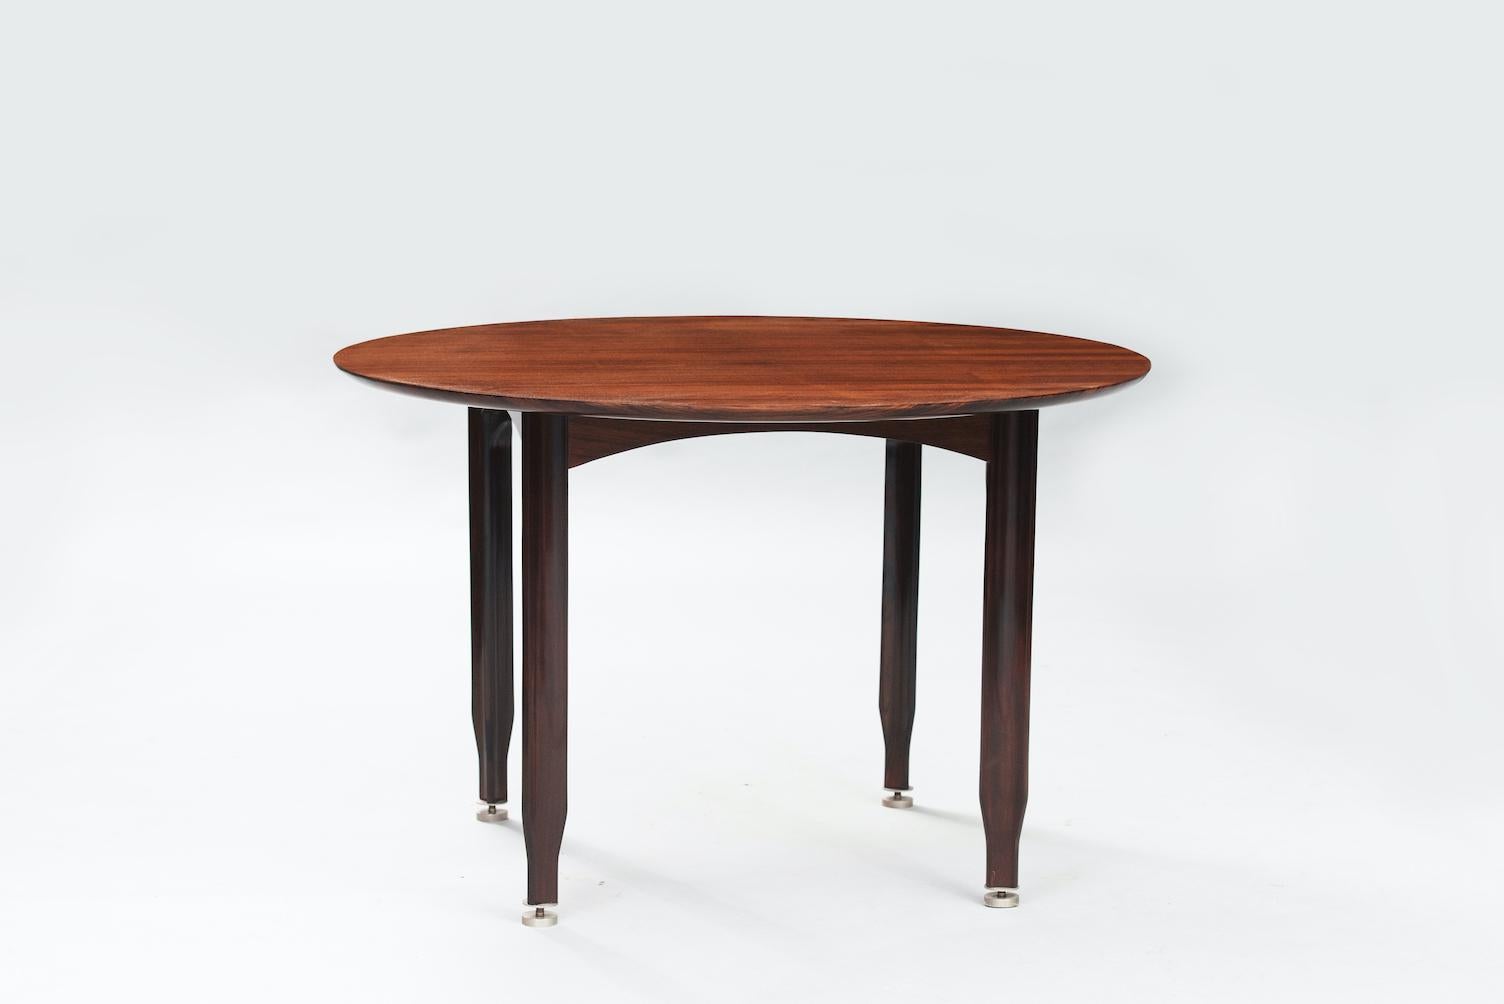 Dassi Lissone Italian Mid-Century Modern round rosewood and stainless steel dining table.